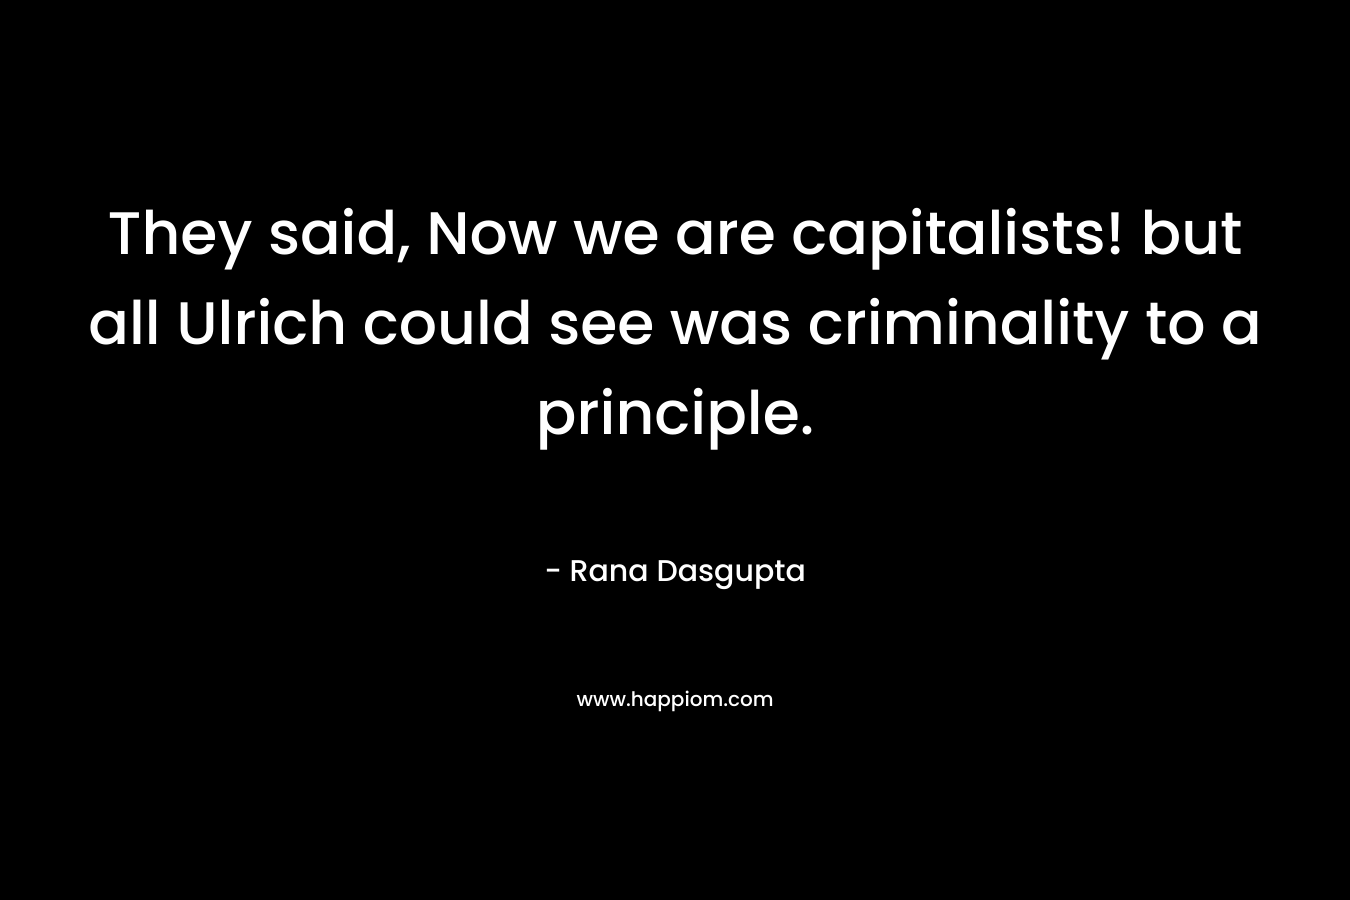 They said, Now we are capitalists! but all Ulrich could see was criminality to a principle. – Rana Dasgupta